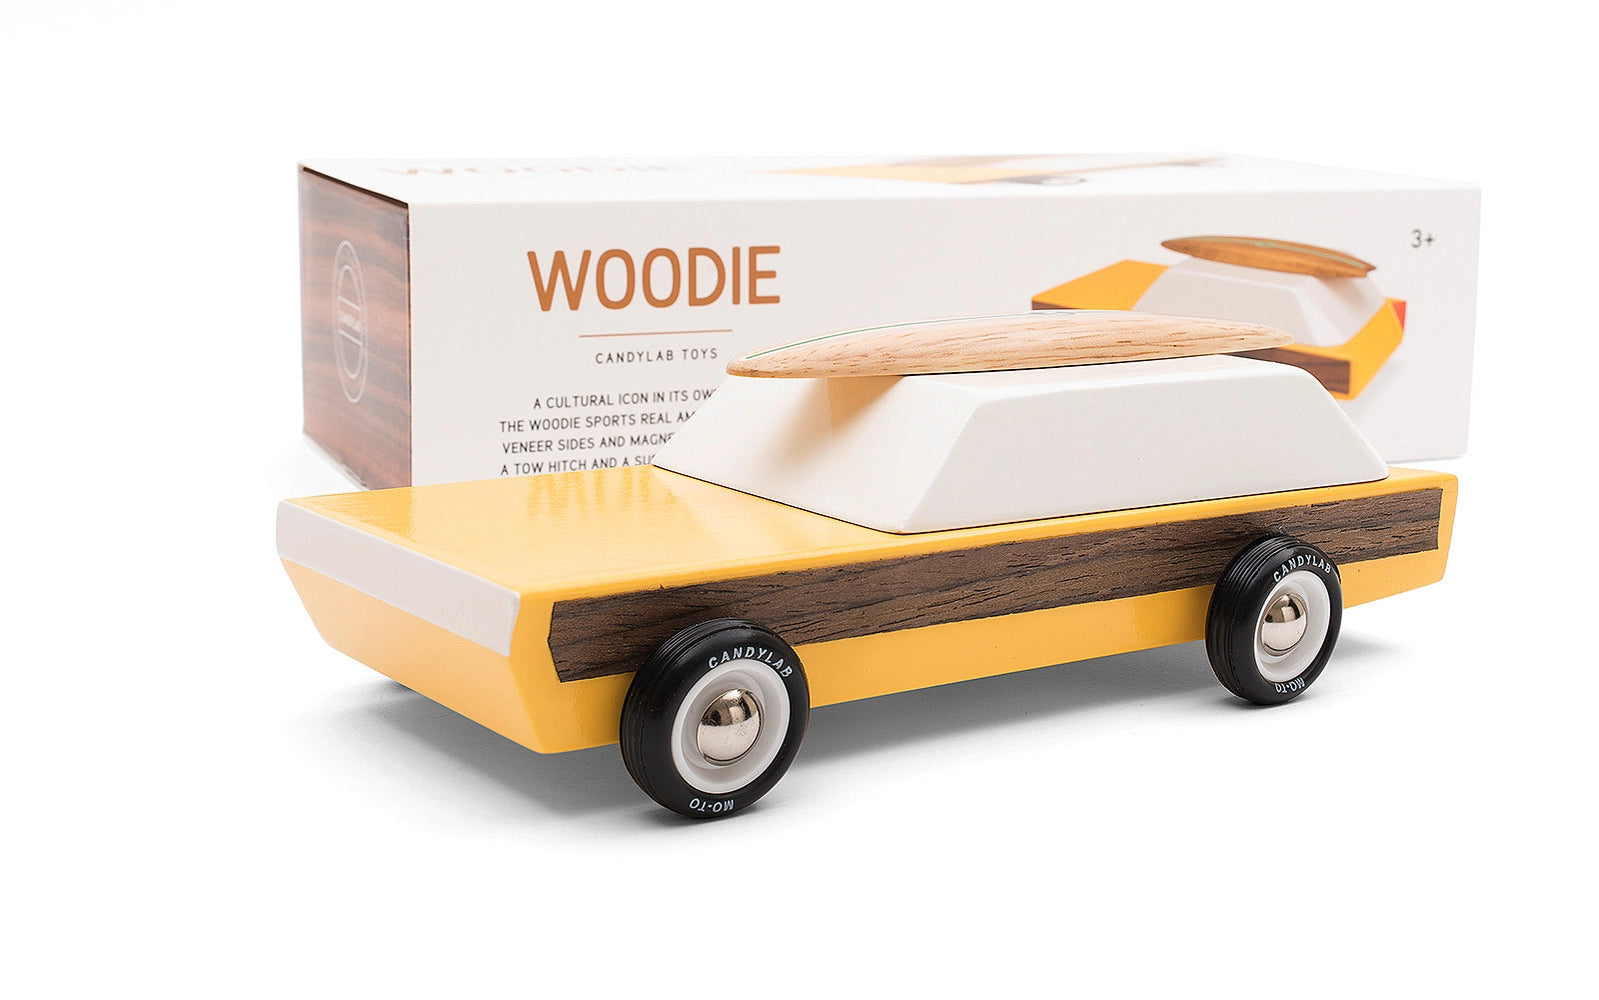 Woodie by Candylab Toys